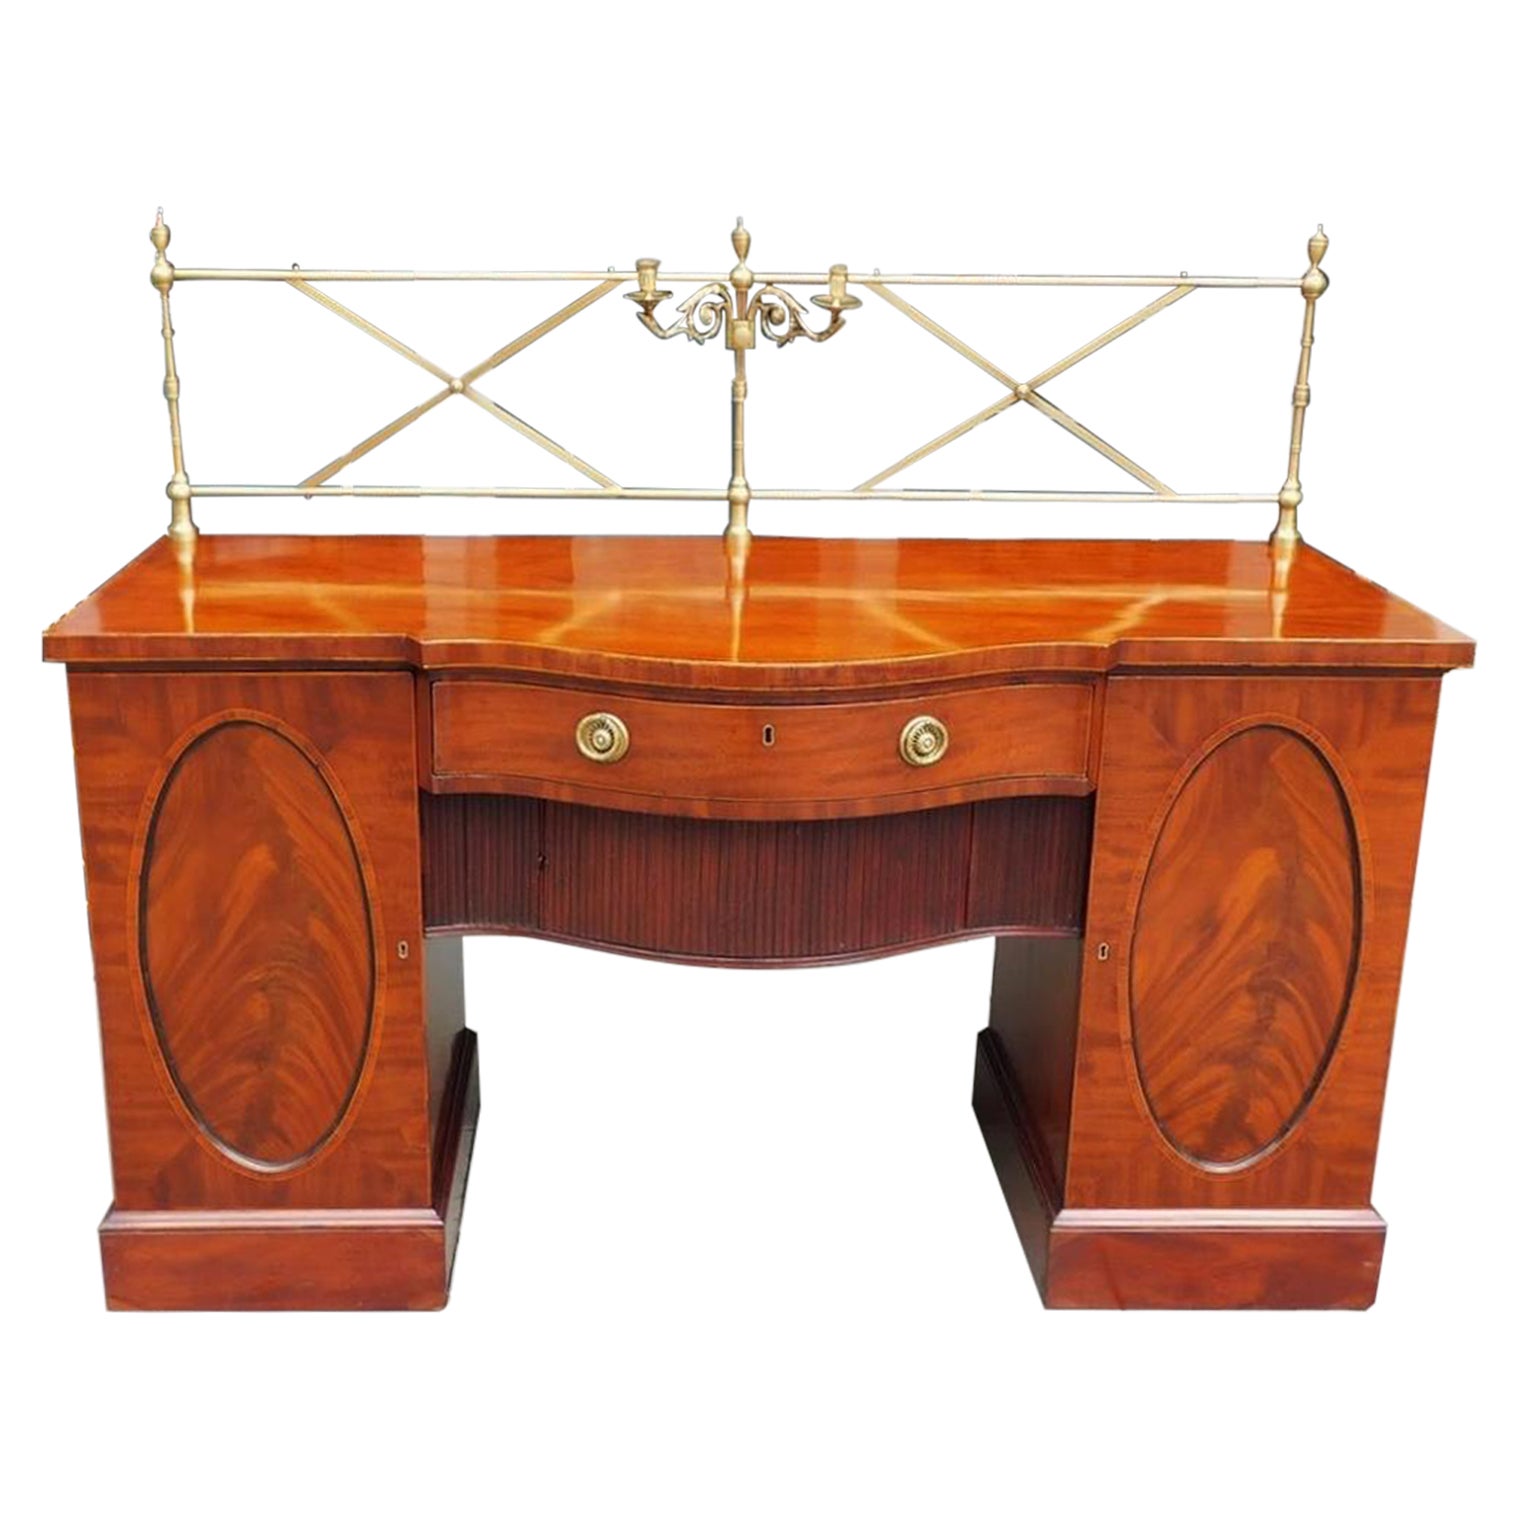 English Regency Mahogany Bow Front Brass Finial Gallery Sideboard, Circa 1780 For Sale